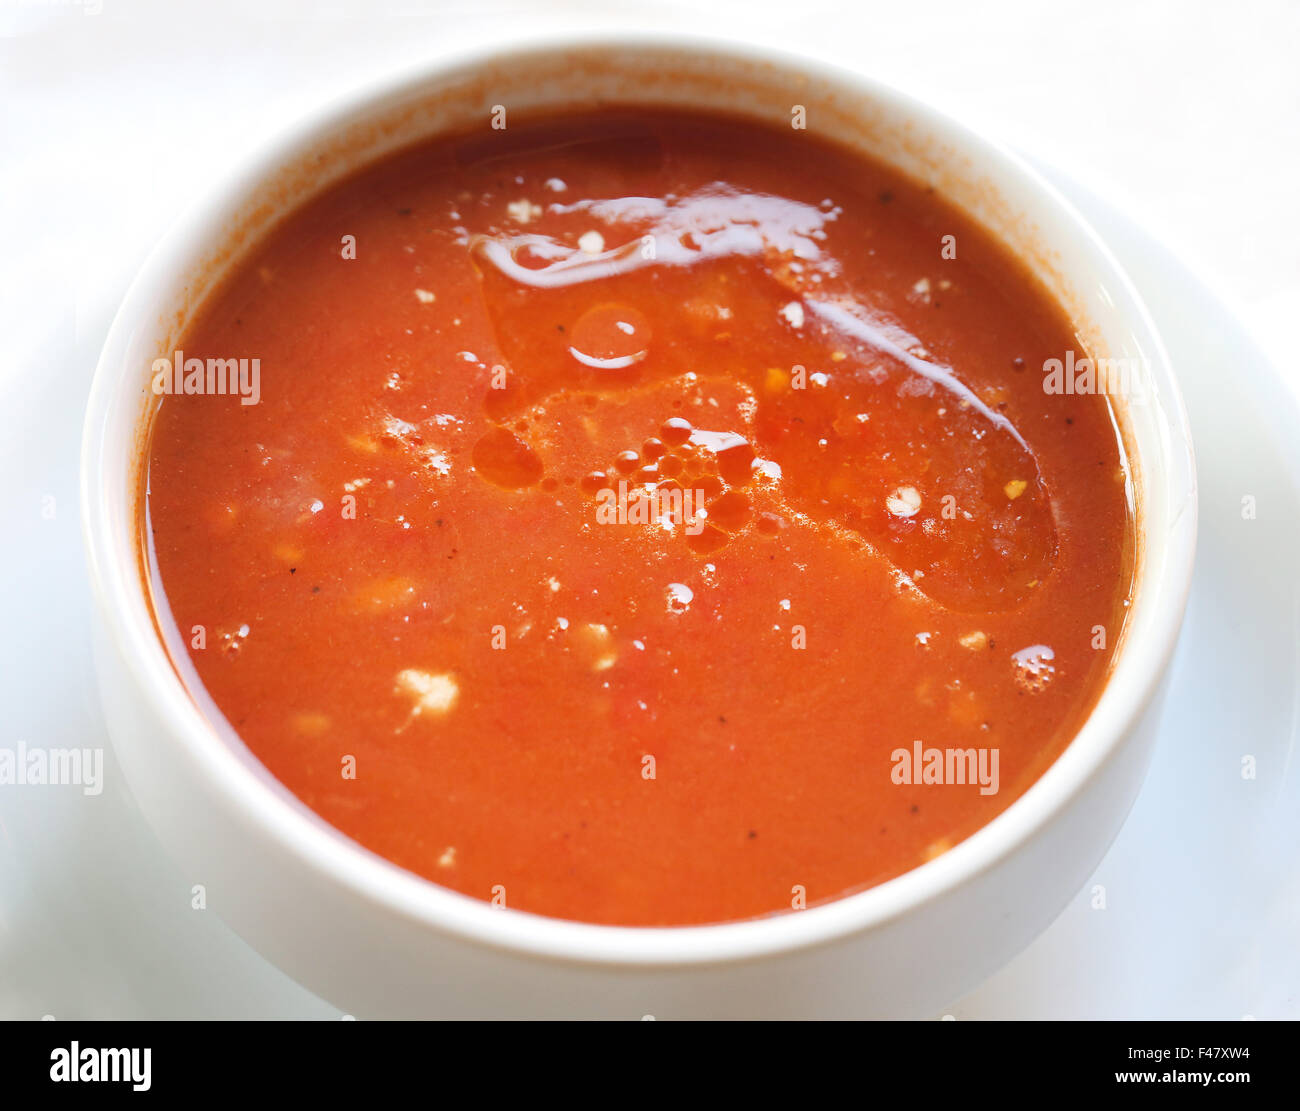 Tasty tomato soup in a plate is photographed close-up Stock Photo